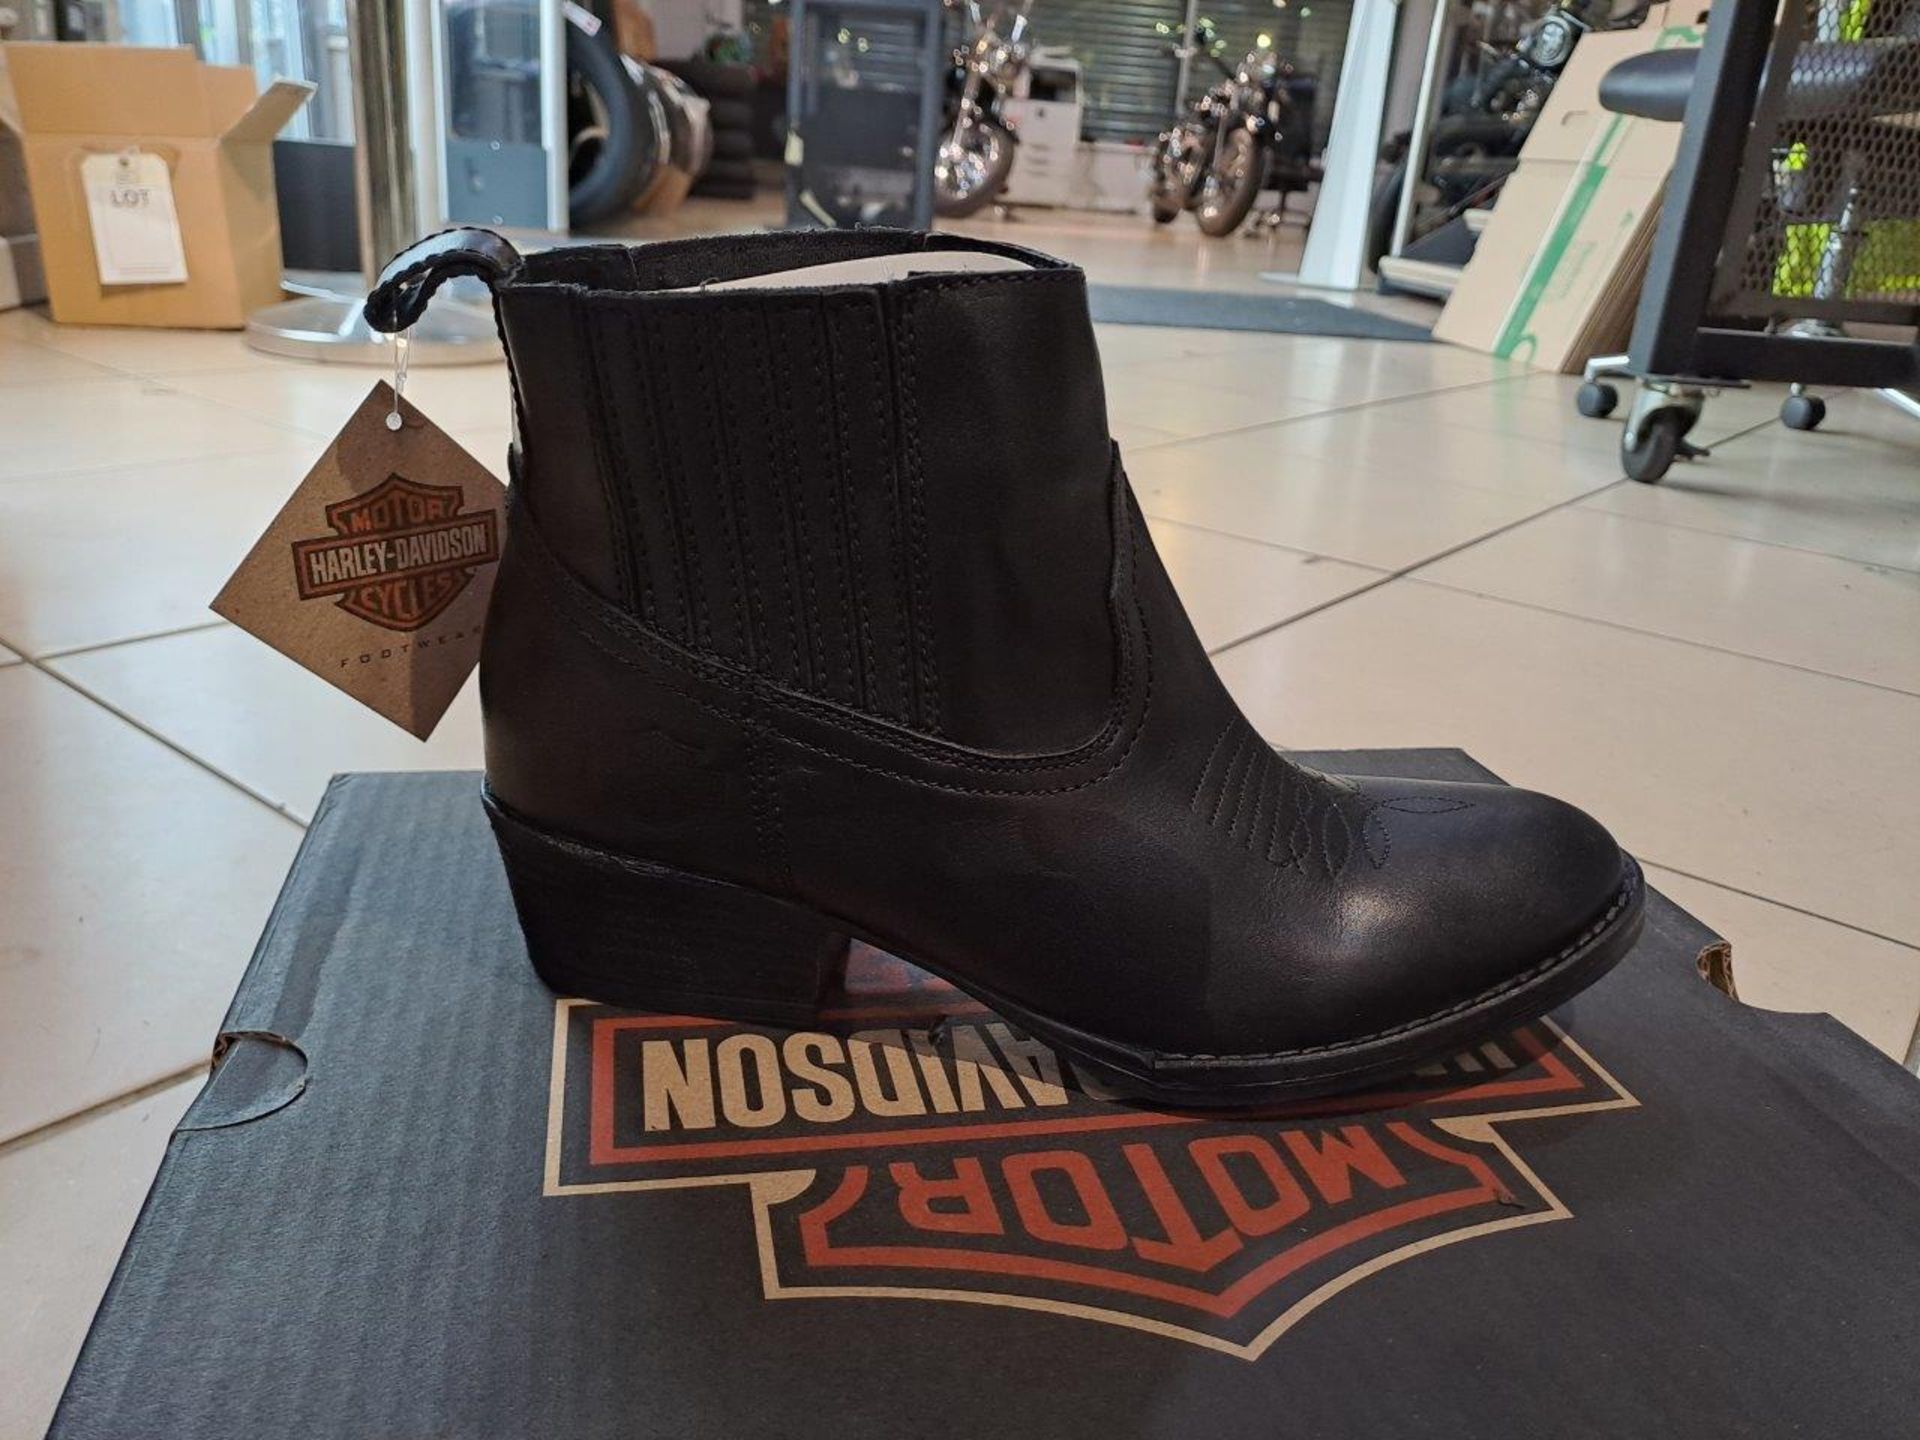 Harley Davidson Curwood Size 7.5 Womens Boots - Image 3 of 8